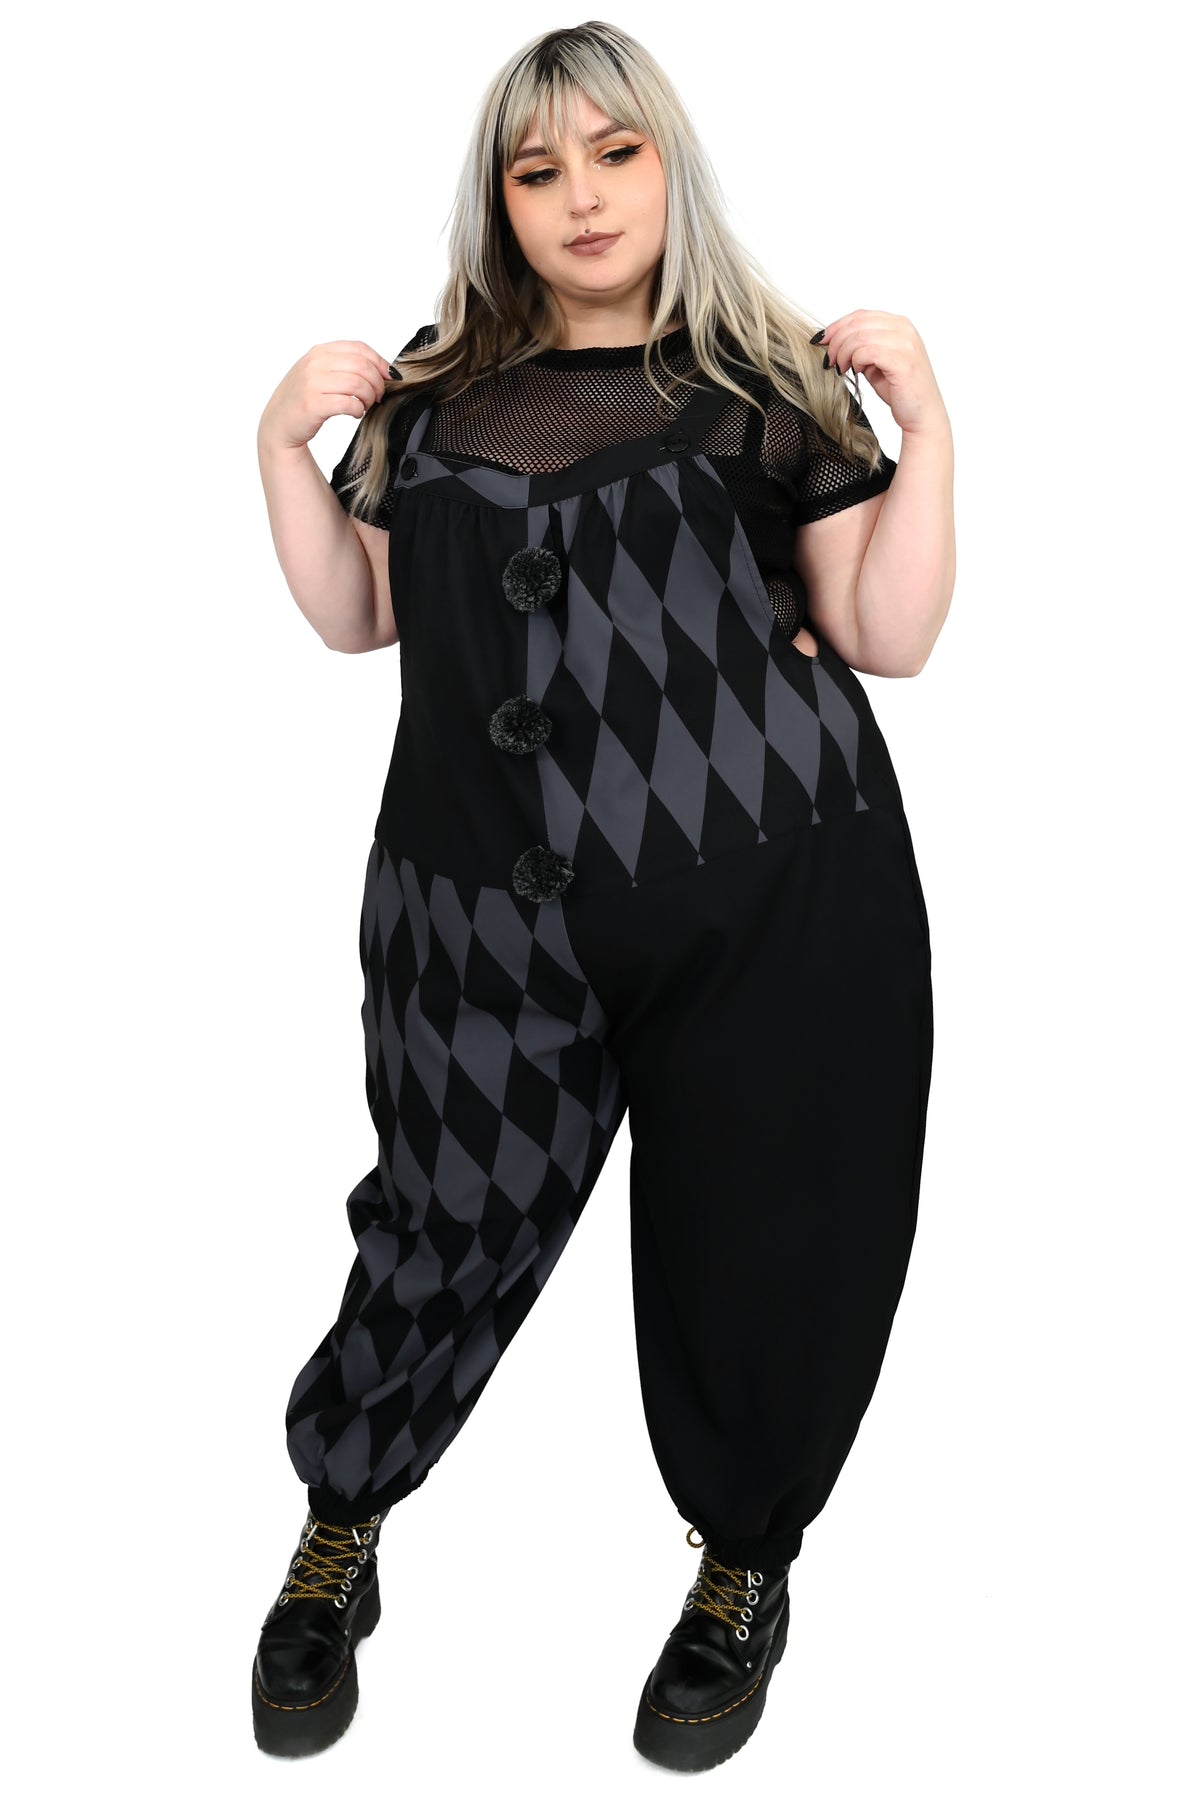 black and grey colorblock overalls with harlequin diamond print and front pom poms